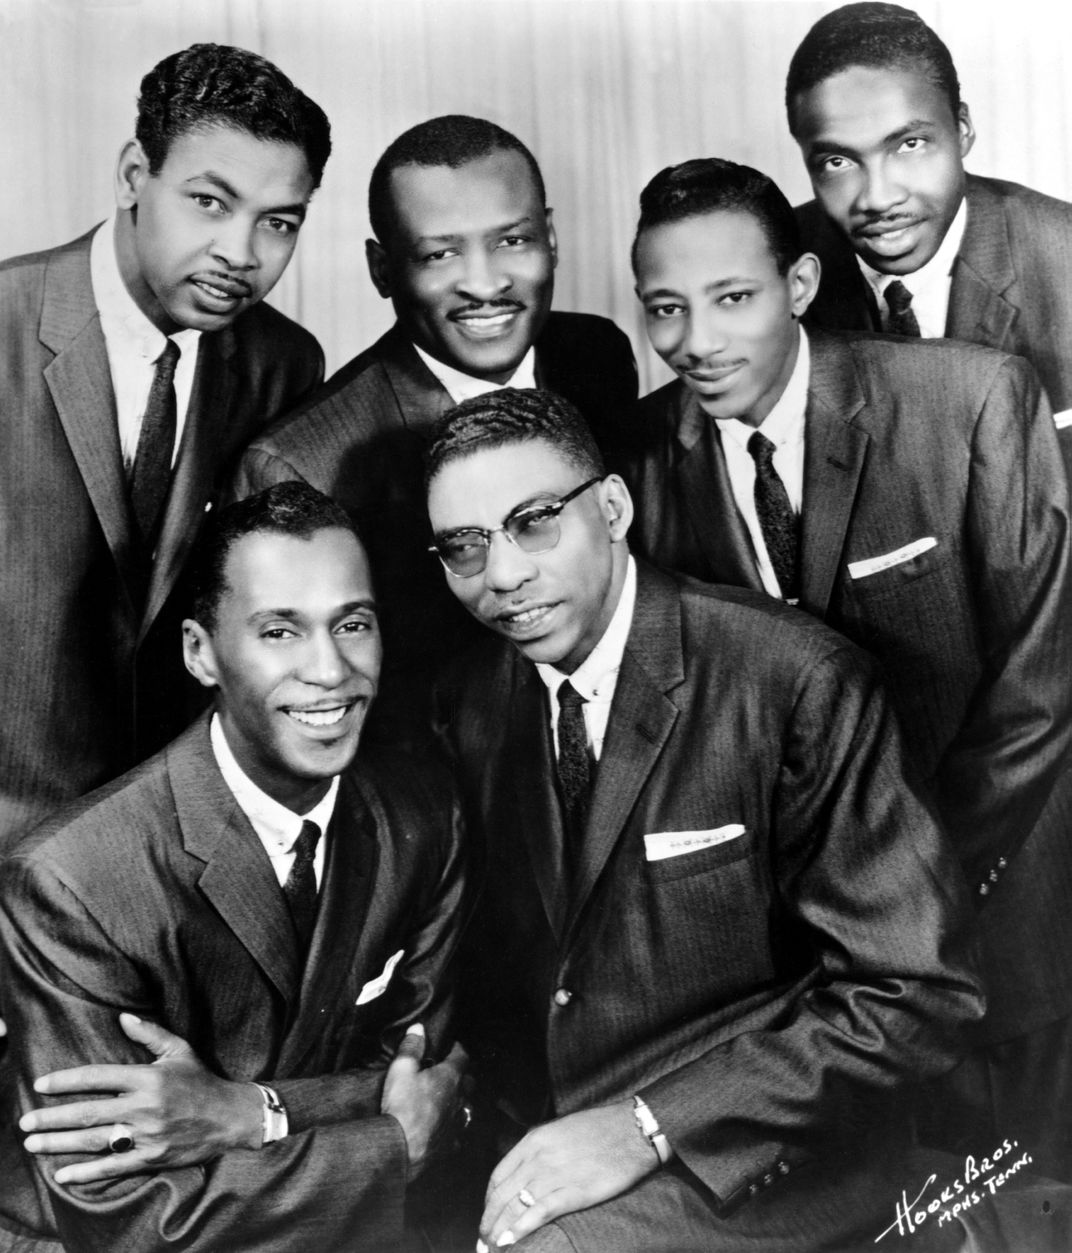 Gospel group the Swan Silvertones (Top row L to R: Louis Johnson, John Myles, William Connor and Linwood Hargrove; bottom row L to R: Paul Owens and Claude Jeter) pose for a Vee Jay Records publicity photo circa 1958 in Memphis, Tennessee.